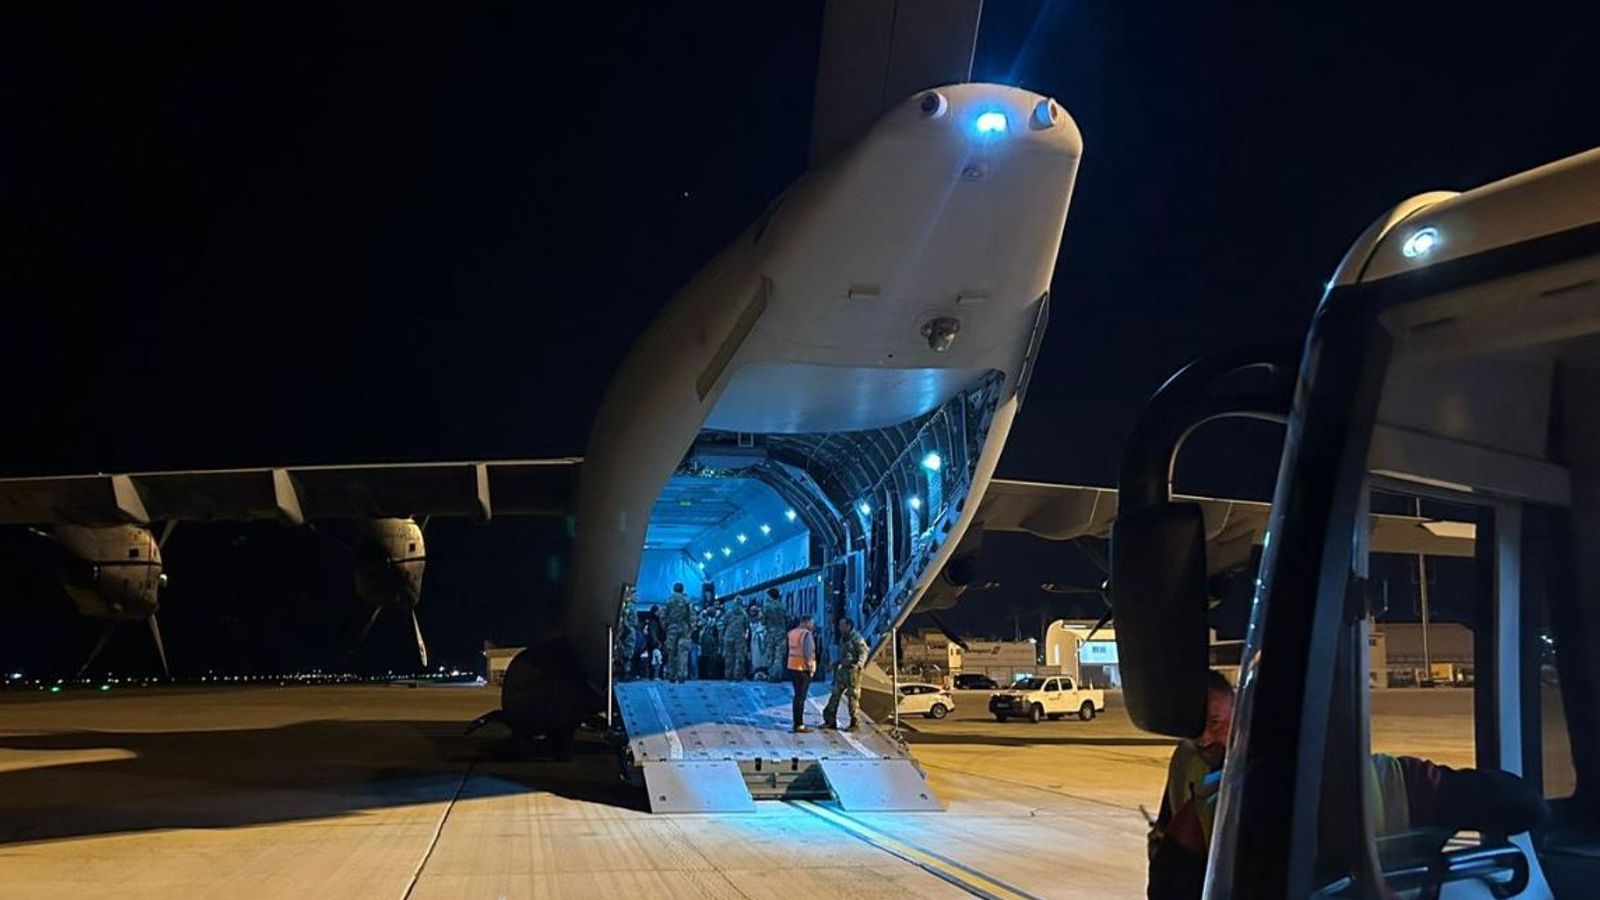 Latest evacuation flights carrying Britons from Sudan expected to land in Cyprus - as UK troops prepare to run Khartoum airfield